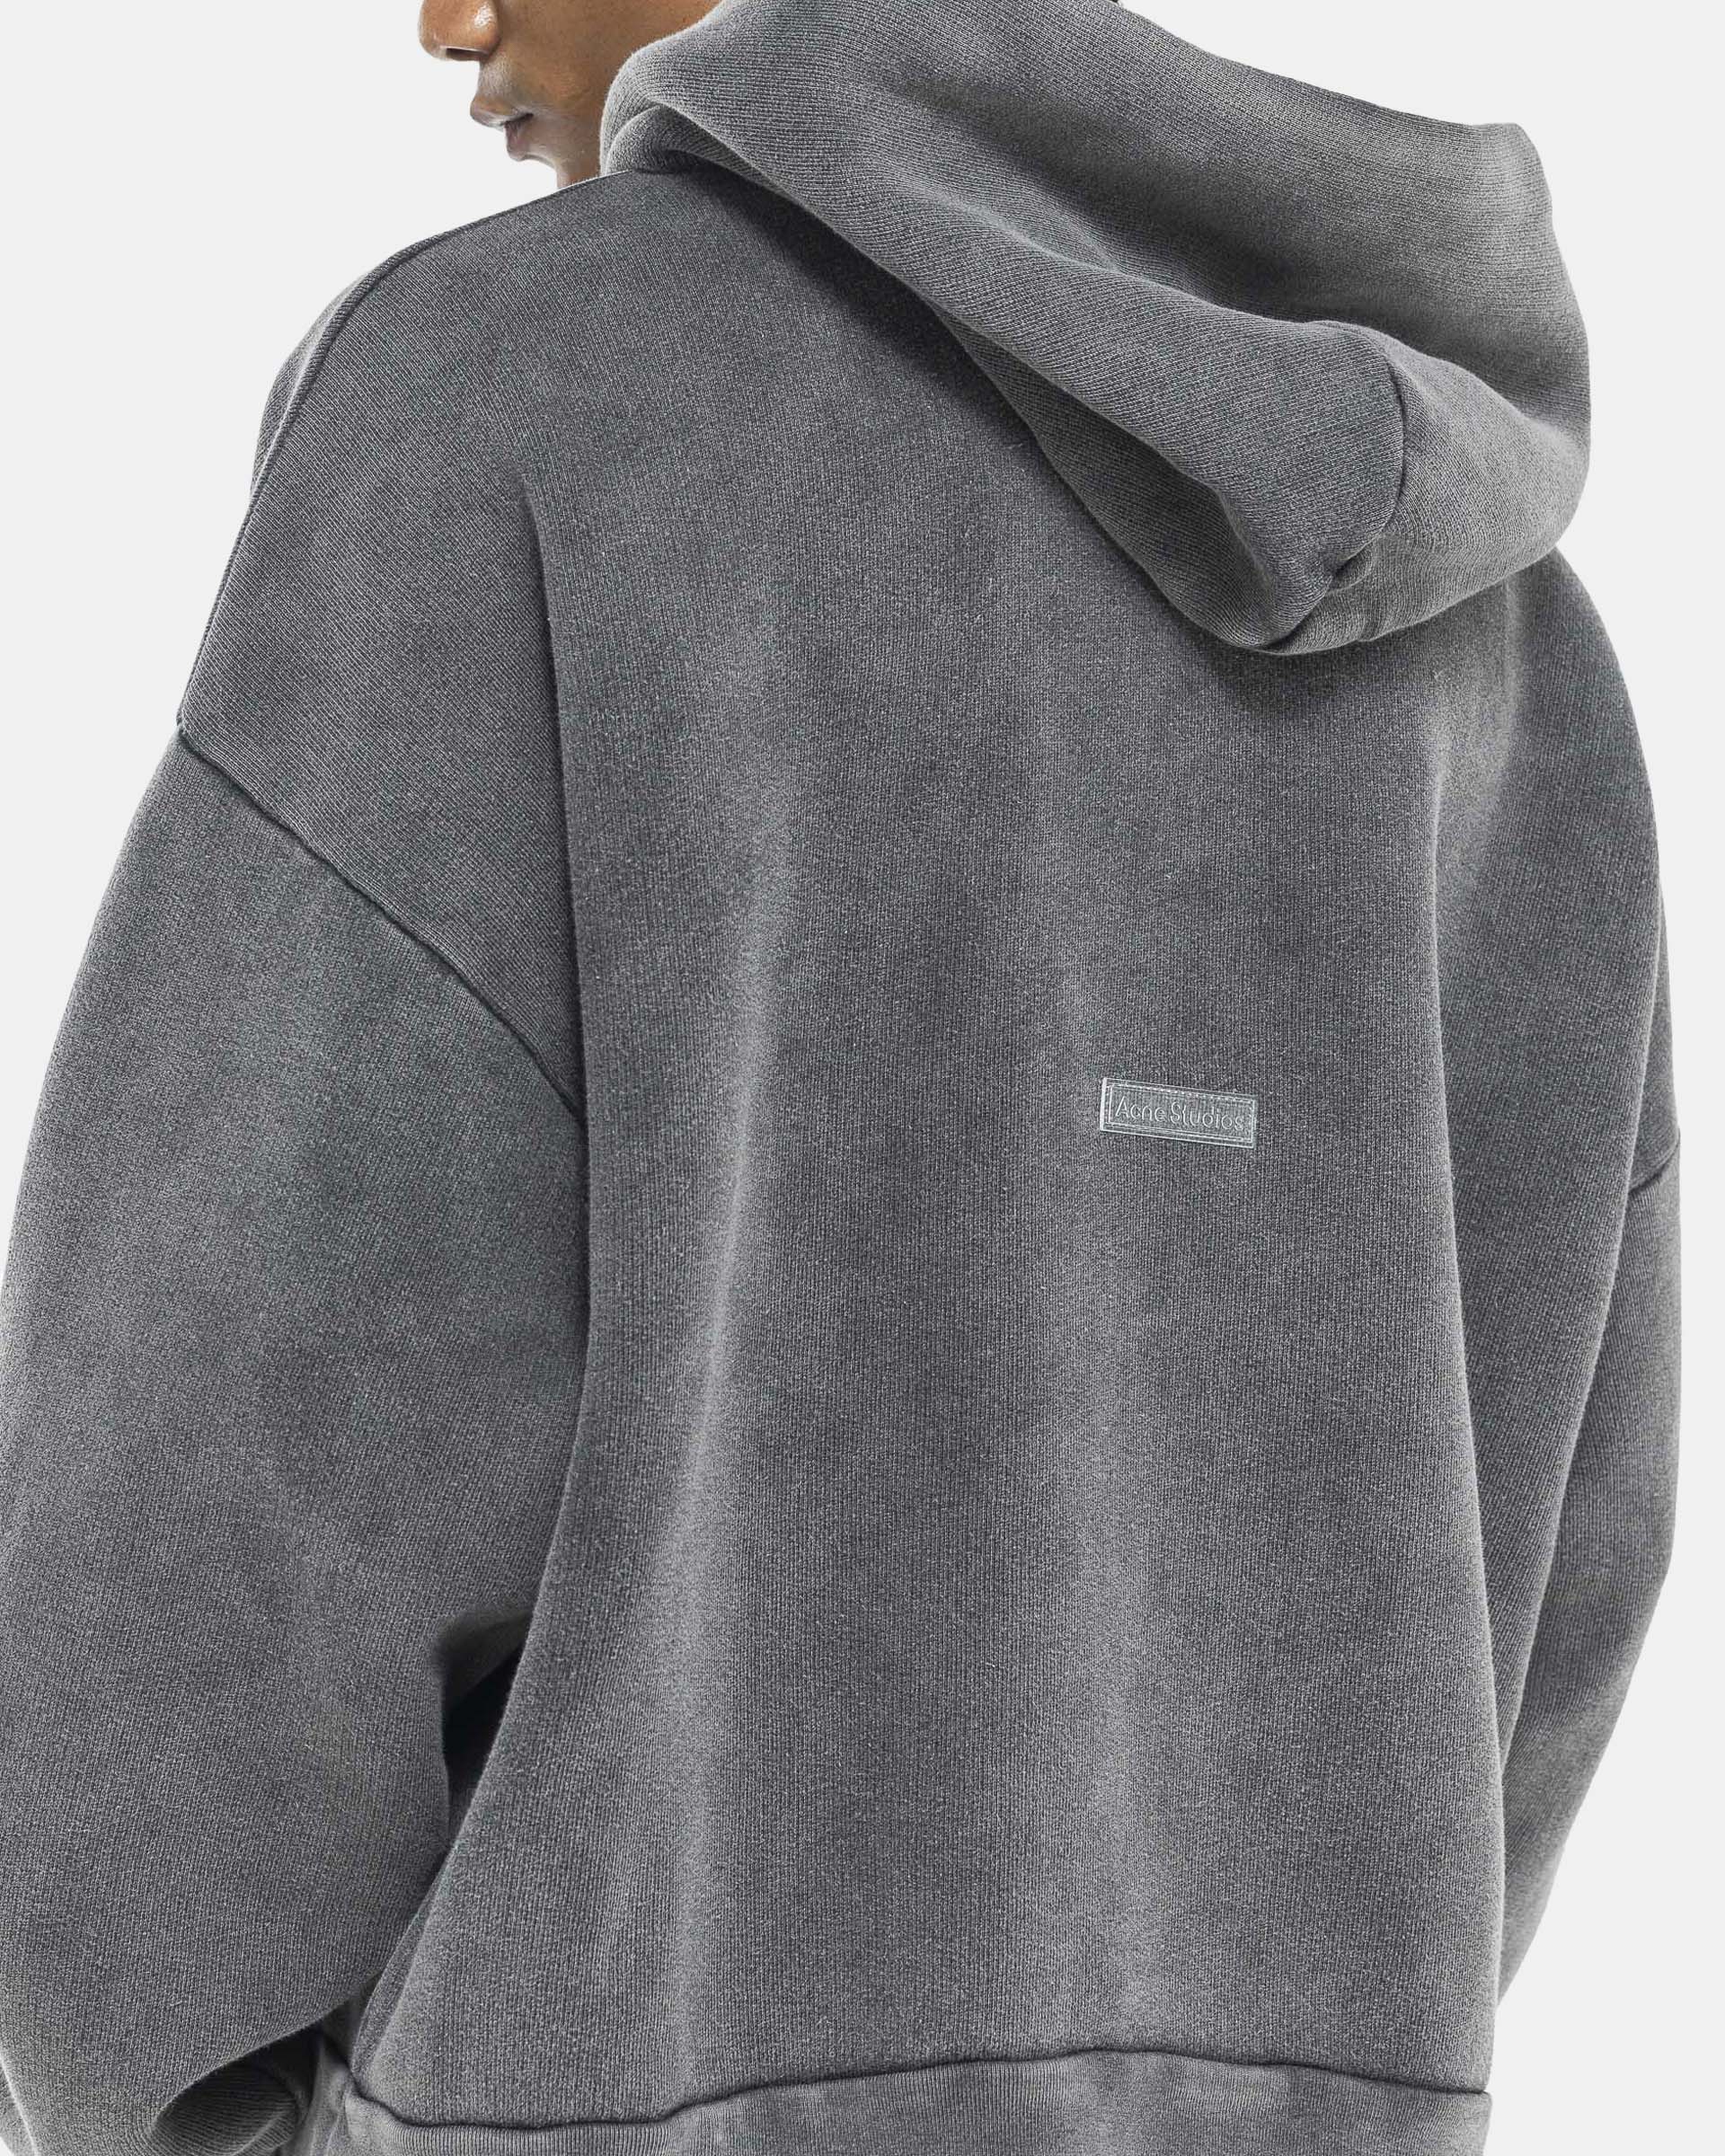 Model wearing Acne Studios Hooded Sweater in Faded Black on the white background